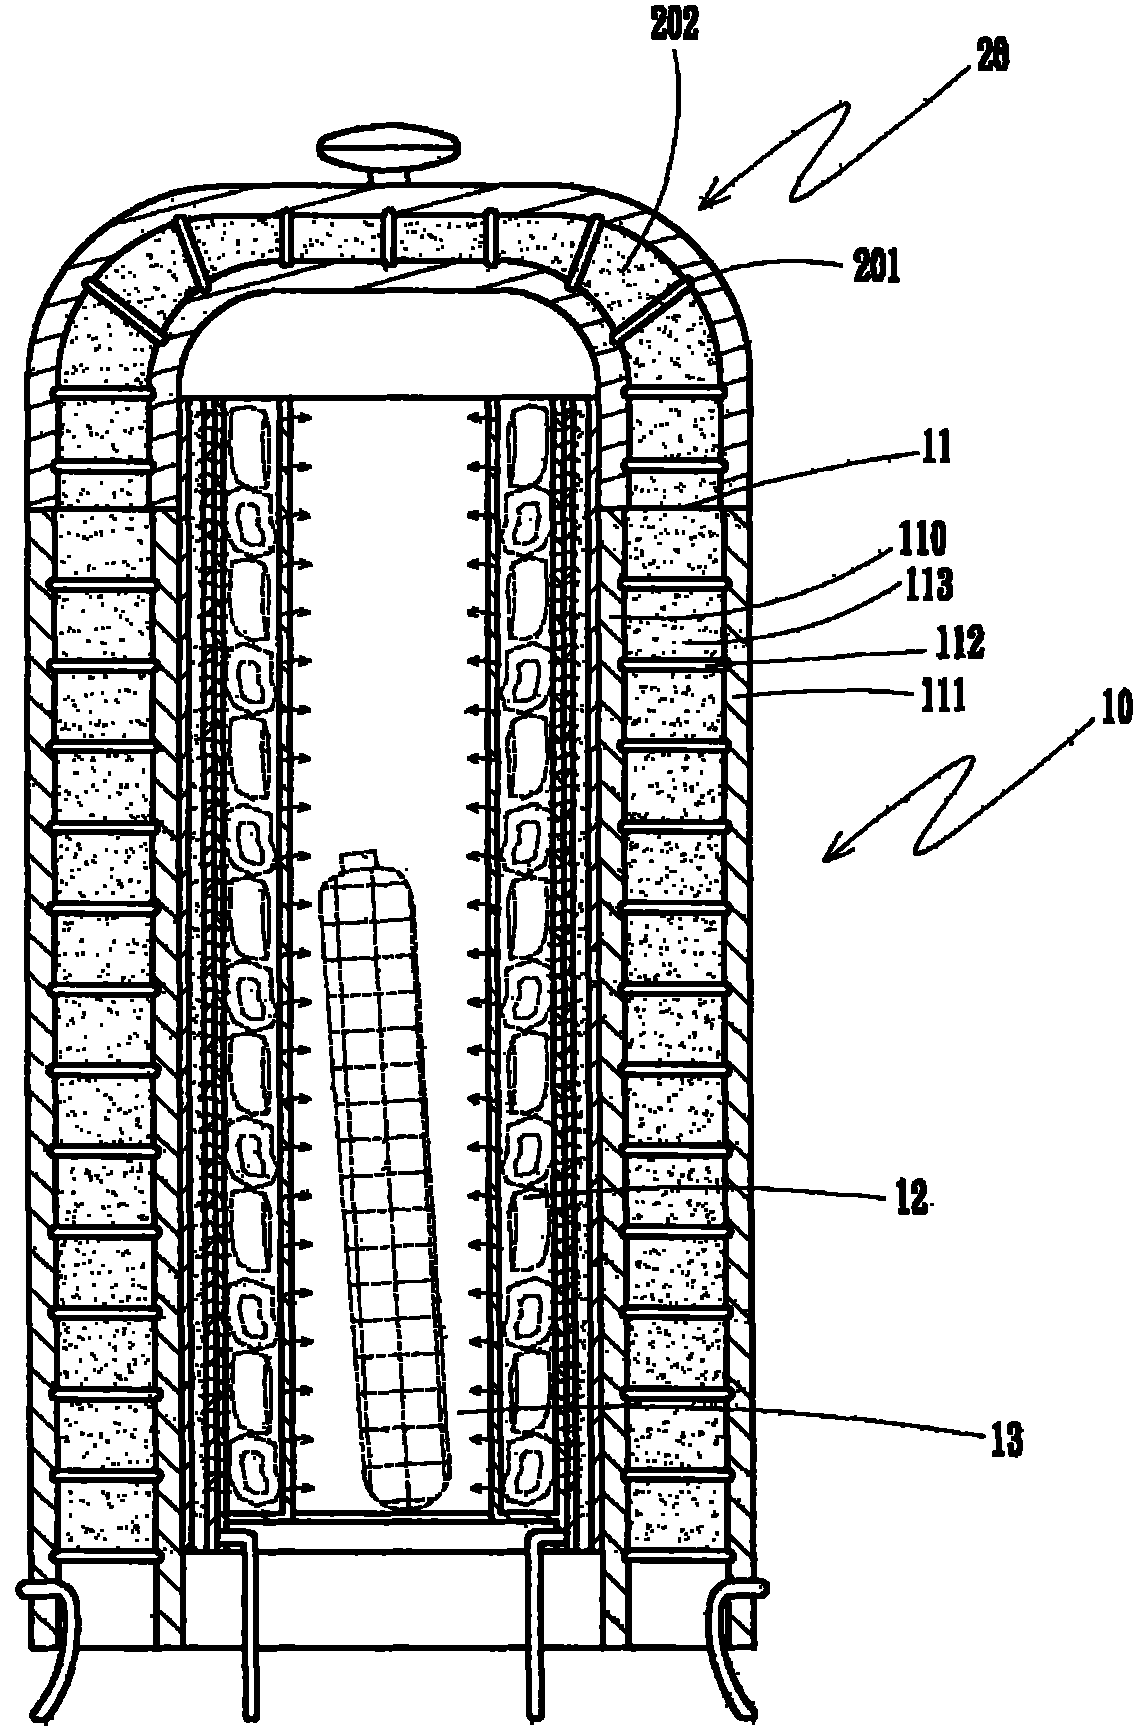 Improved structure of furnace body